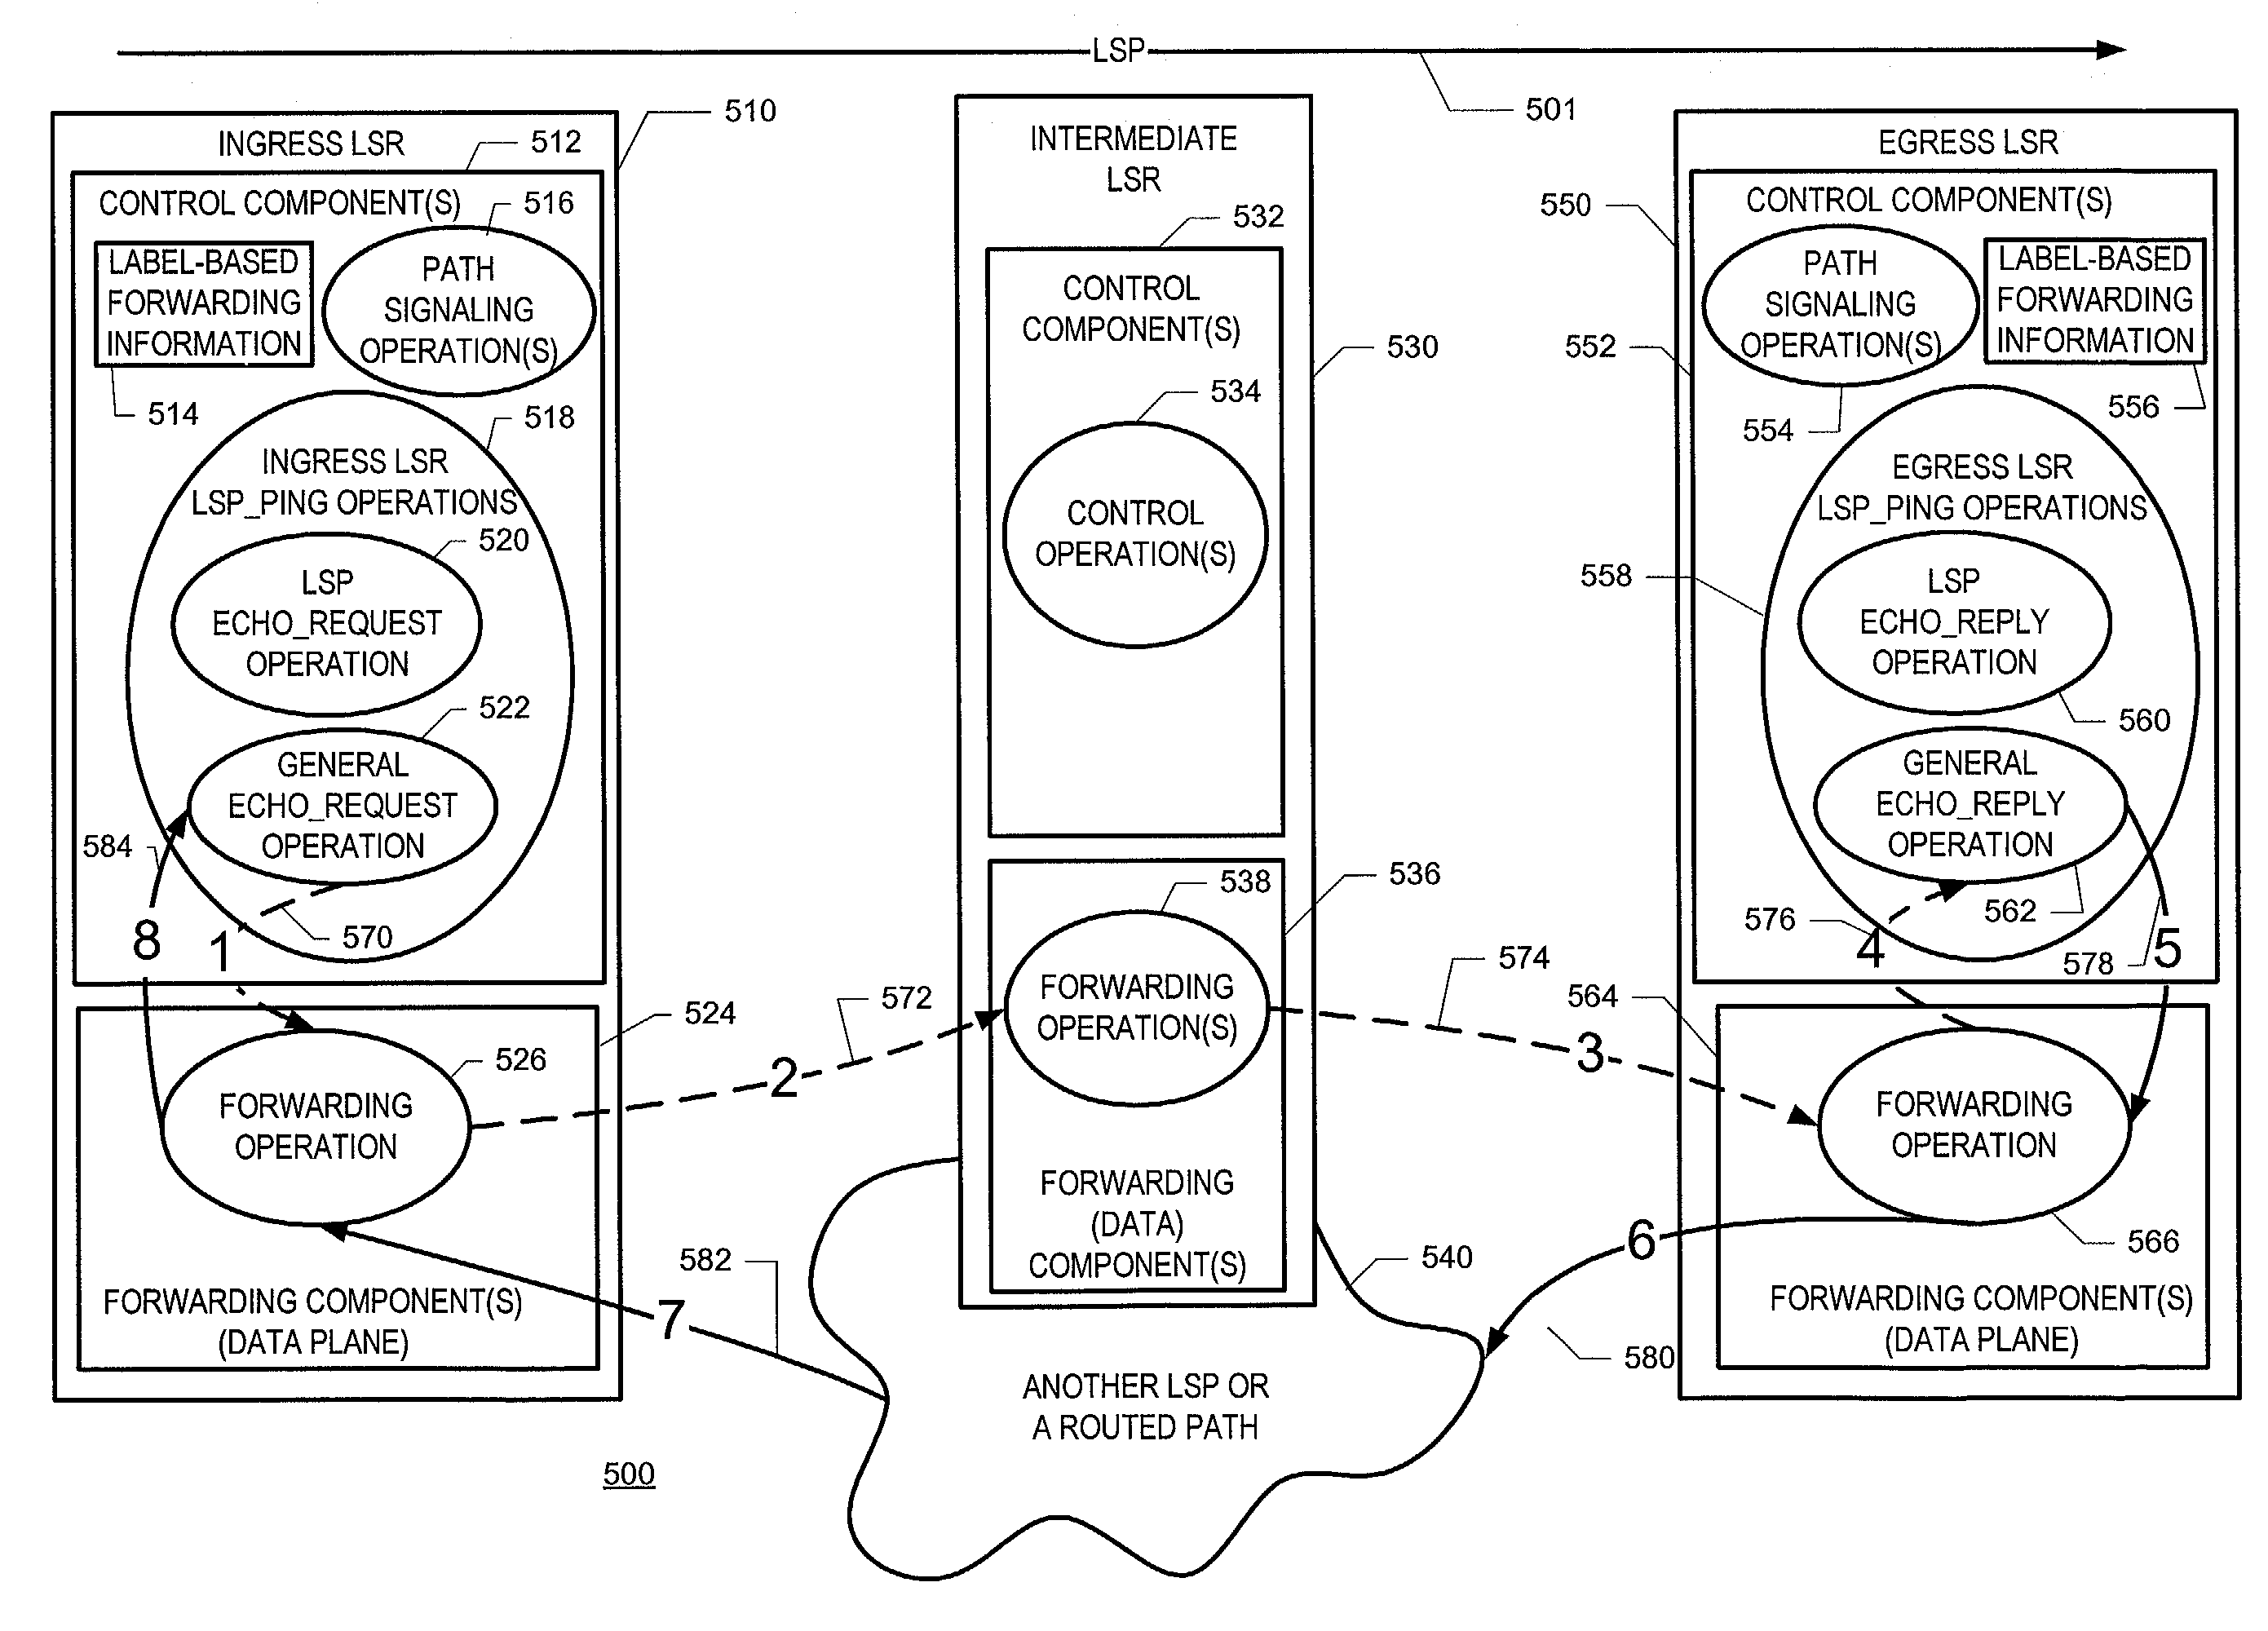 Detecting data plane livelines in connections such as label-switched paths